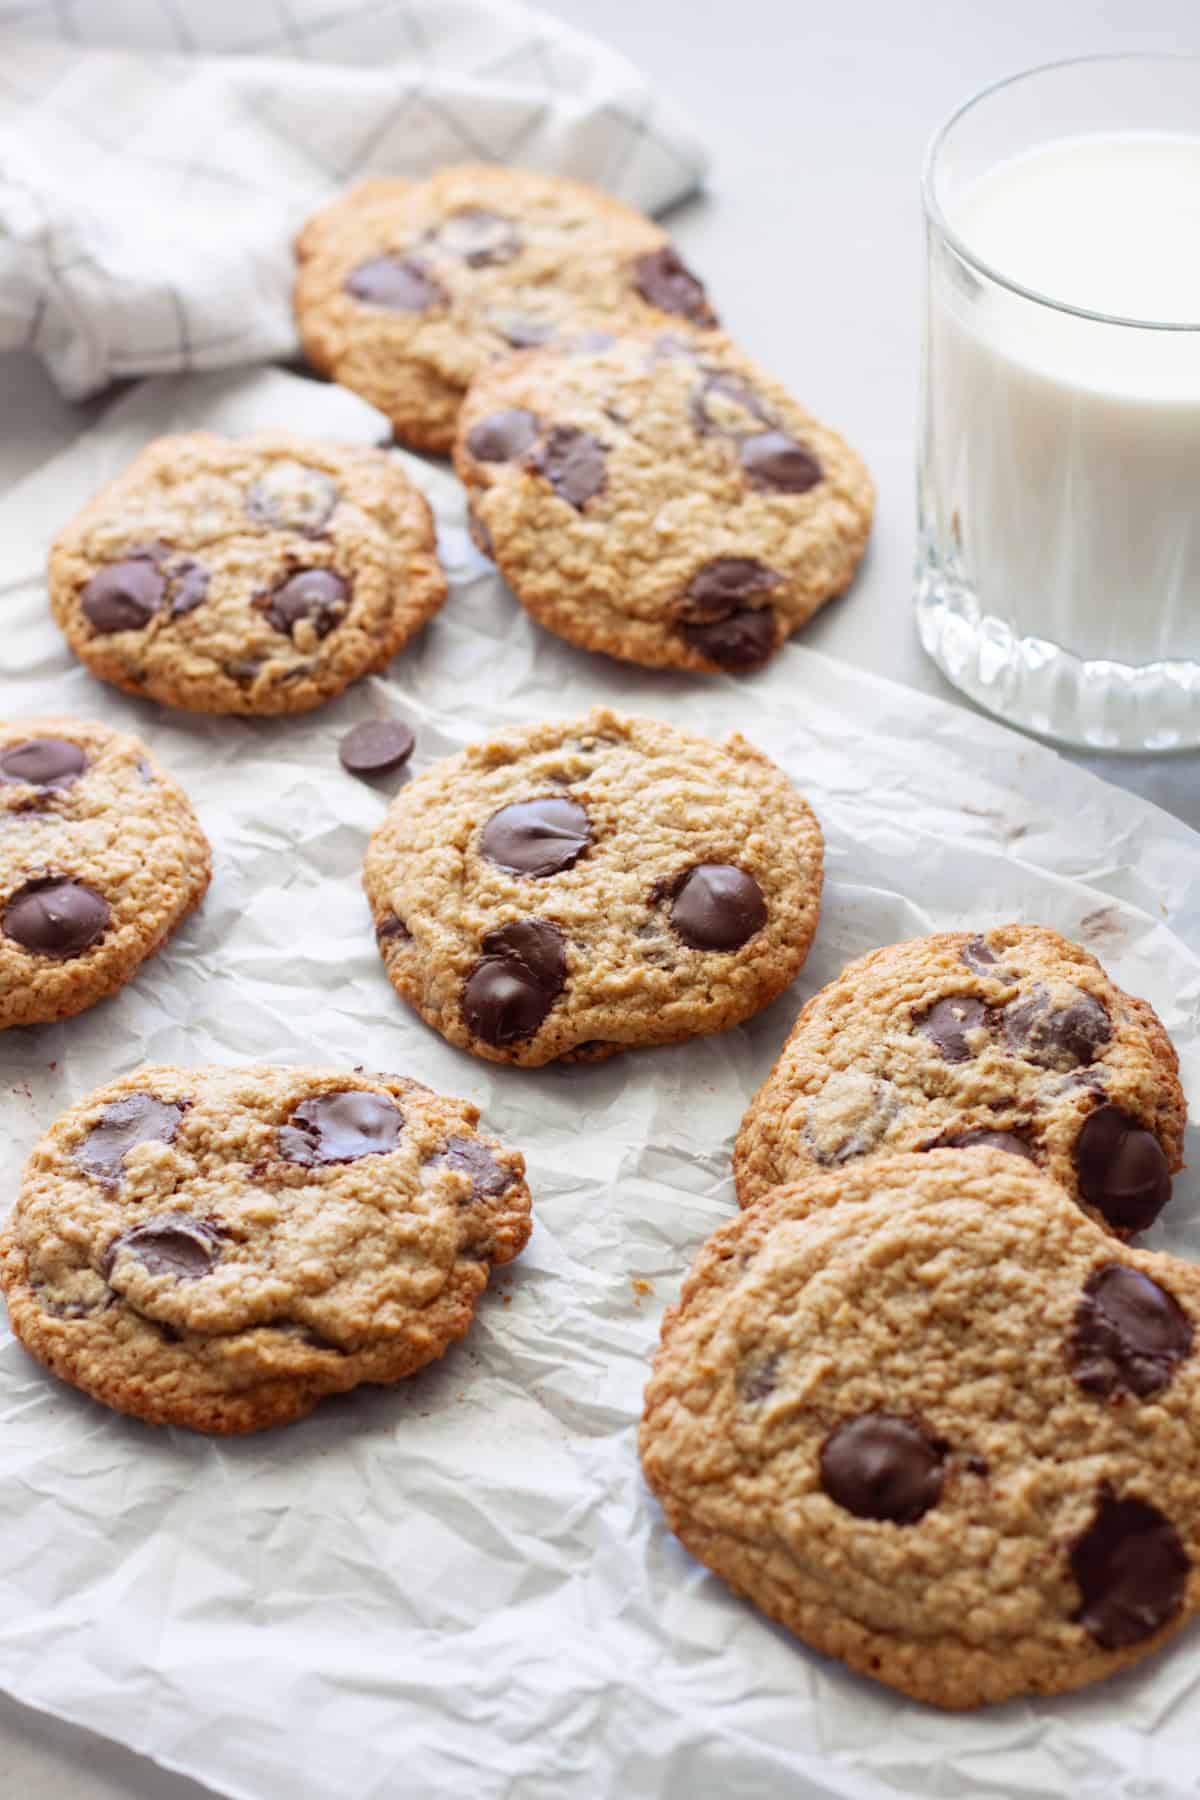 Gluten free chocolate chip cookies on a piece of parchment with a glass of milk to the side.